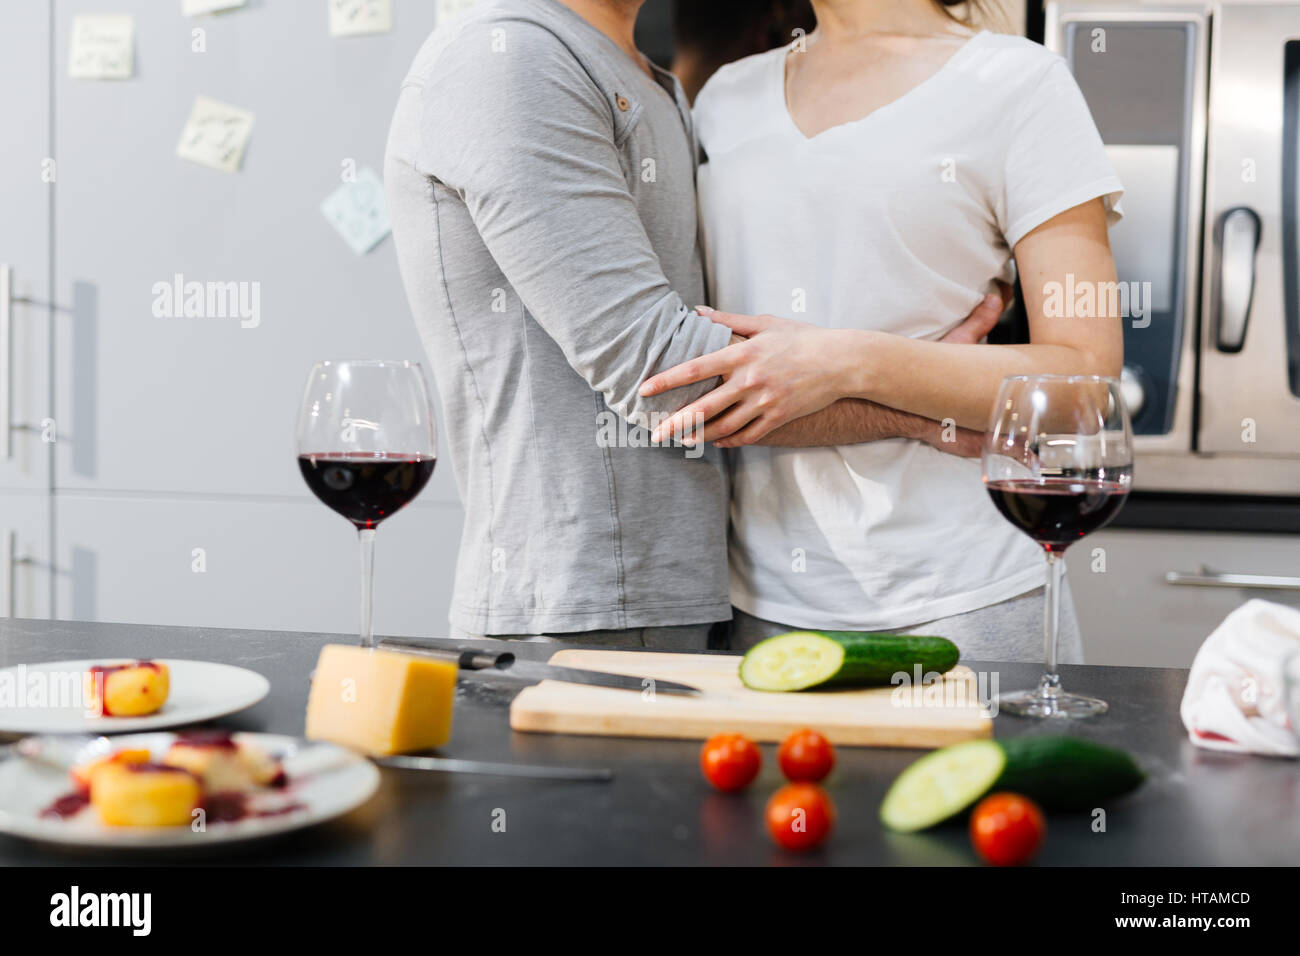 Bonding couple in embrace standing by kitchen table Stock Photo